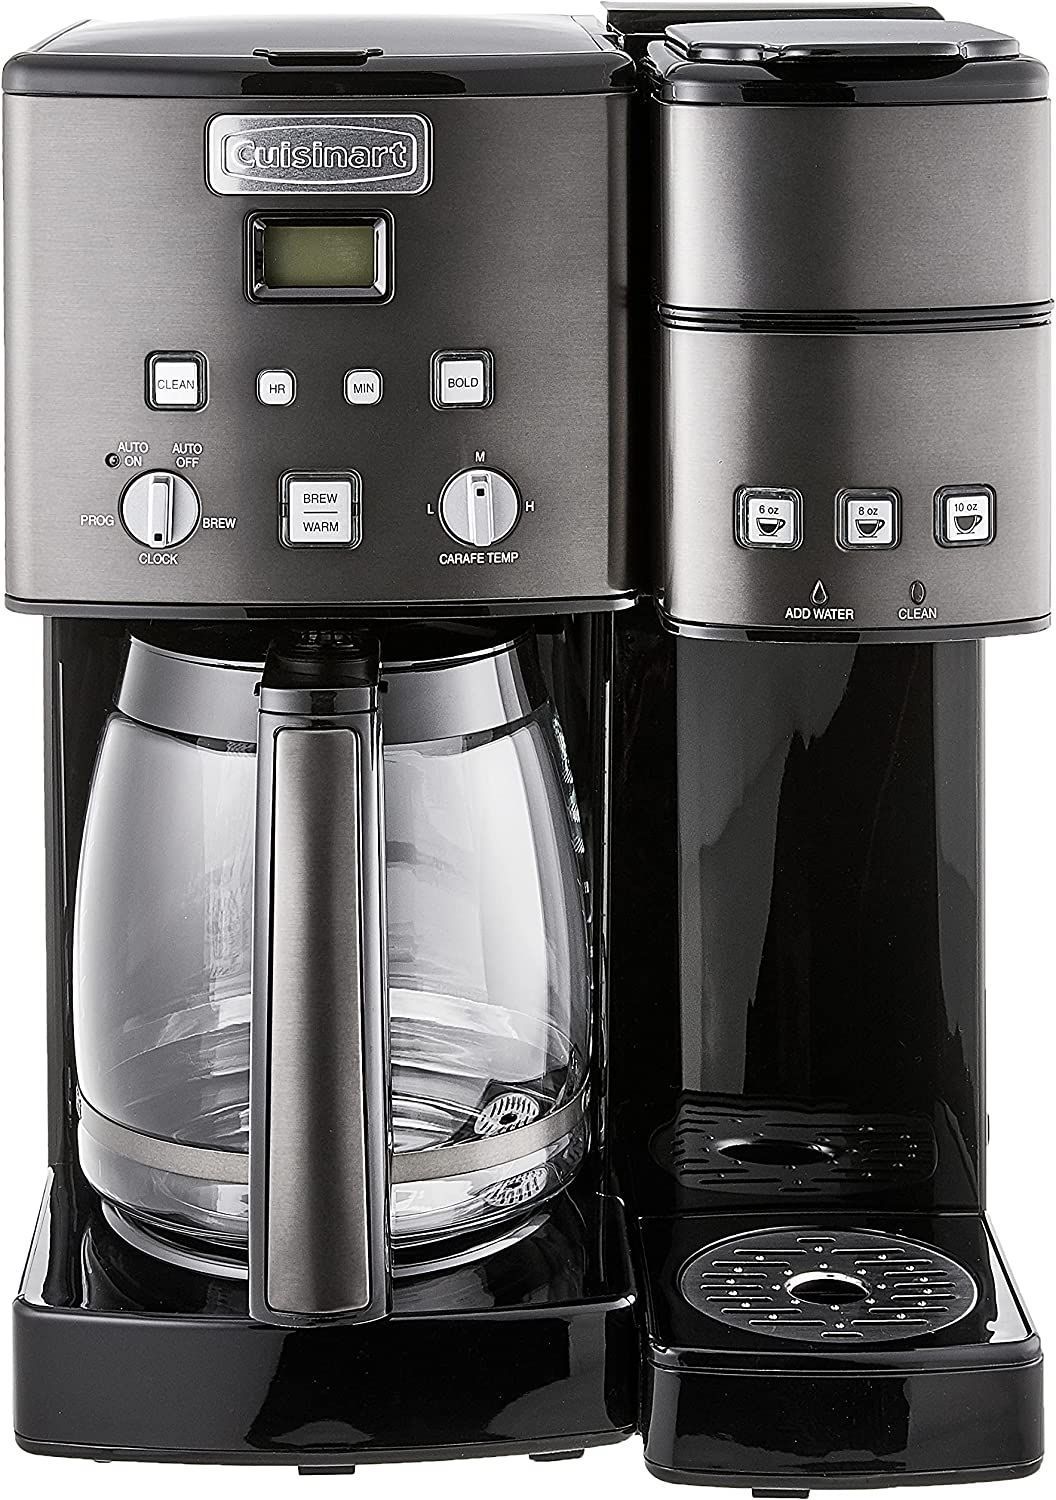 Cuisinart Coffee Center in black with drip coffee maker on left and single-serve maker on right